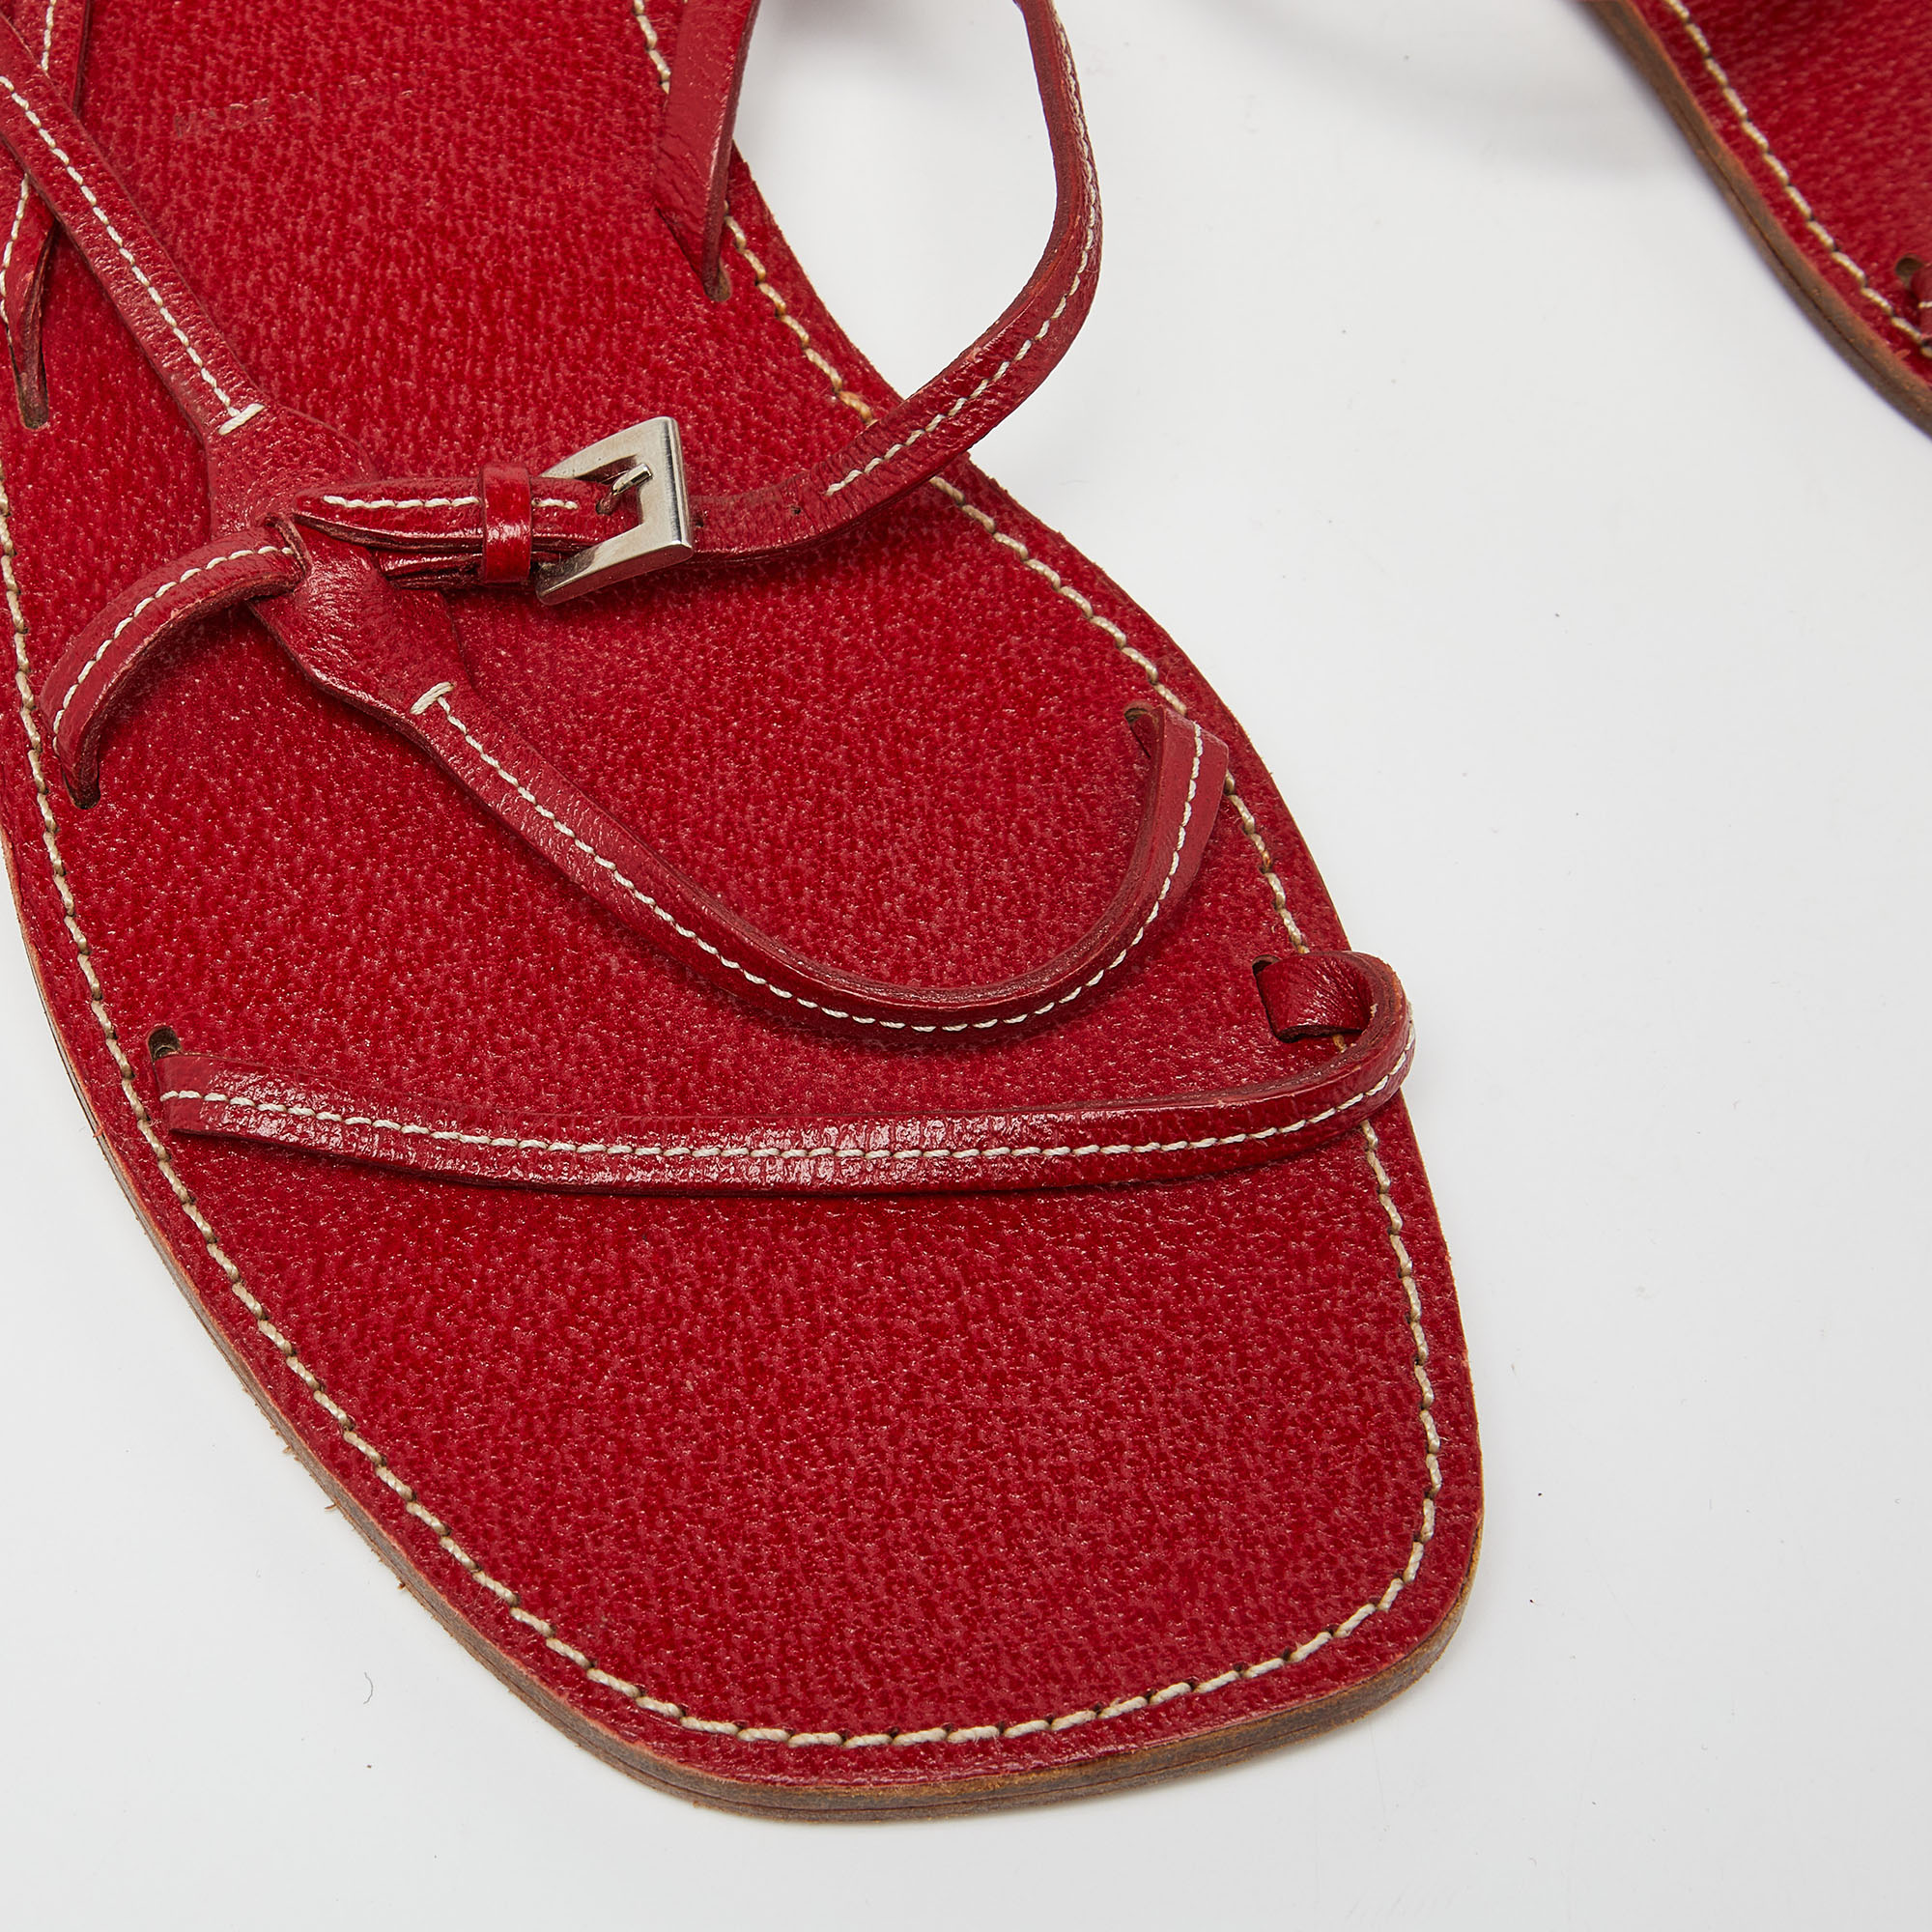 Prada Red Leather Strappy Flat Sandals Size 39